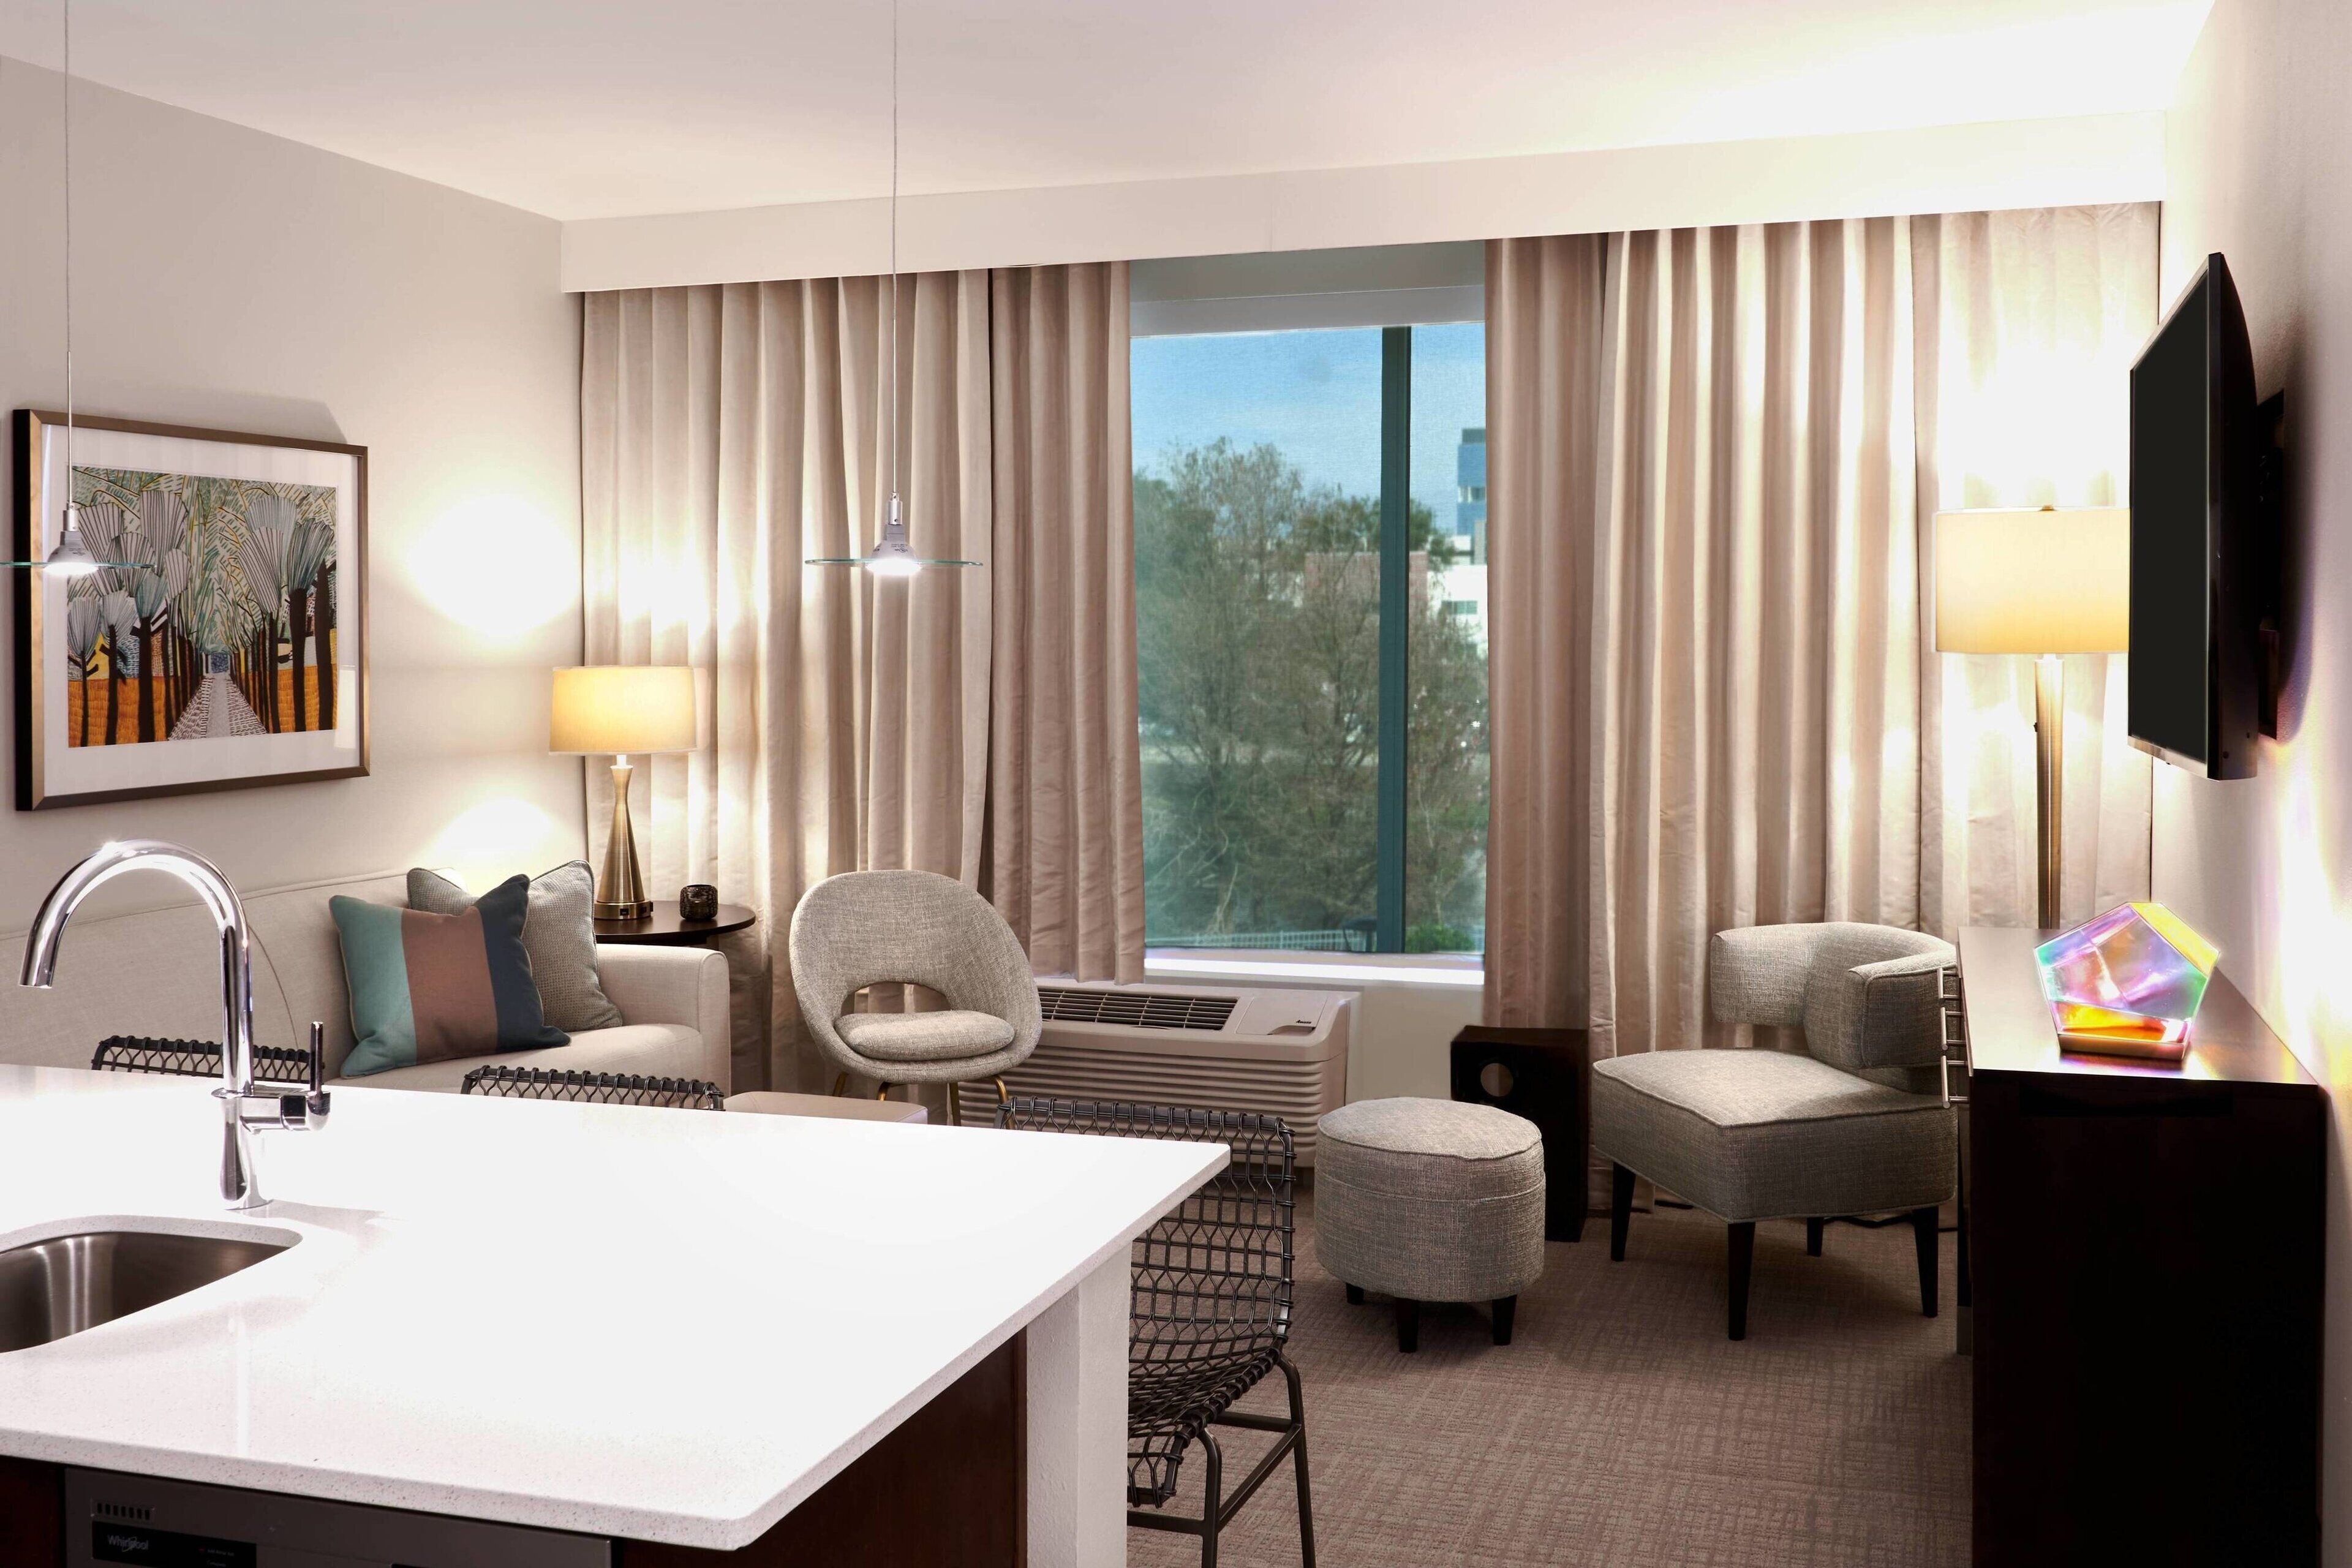 TownePlace Suites by Marriott Orlando Downtown